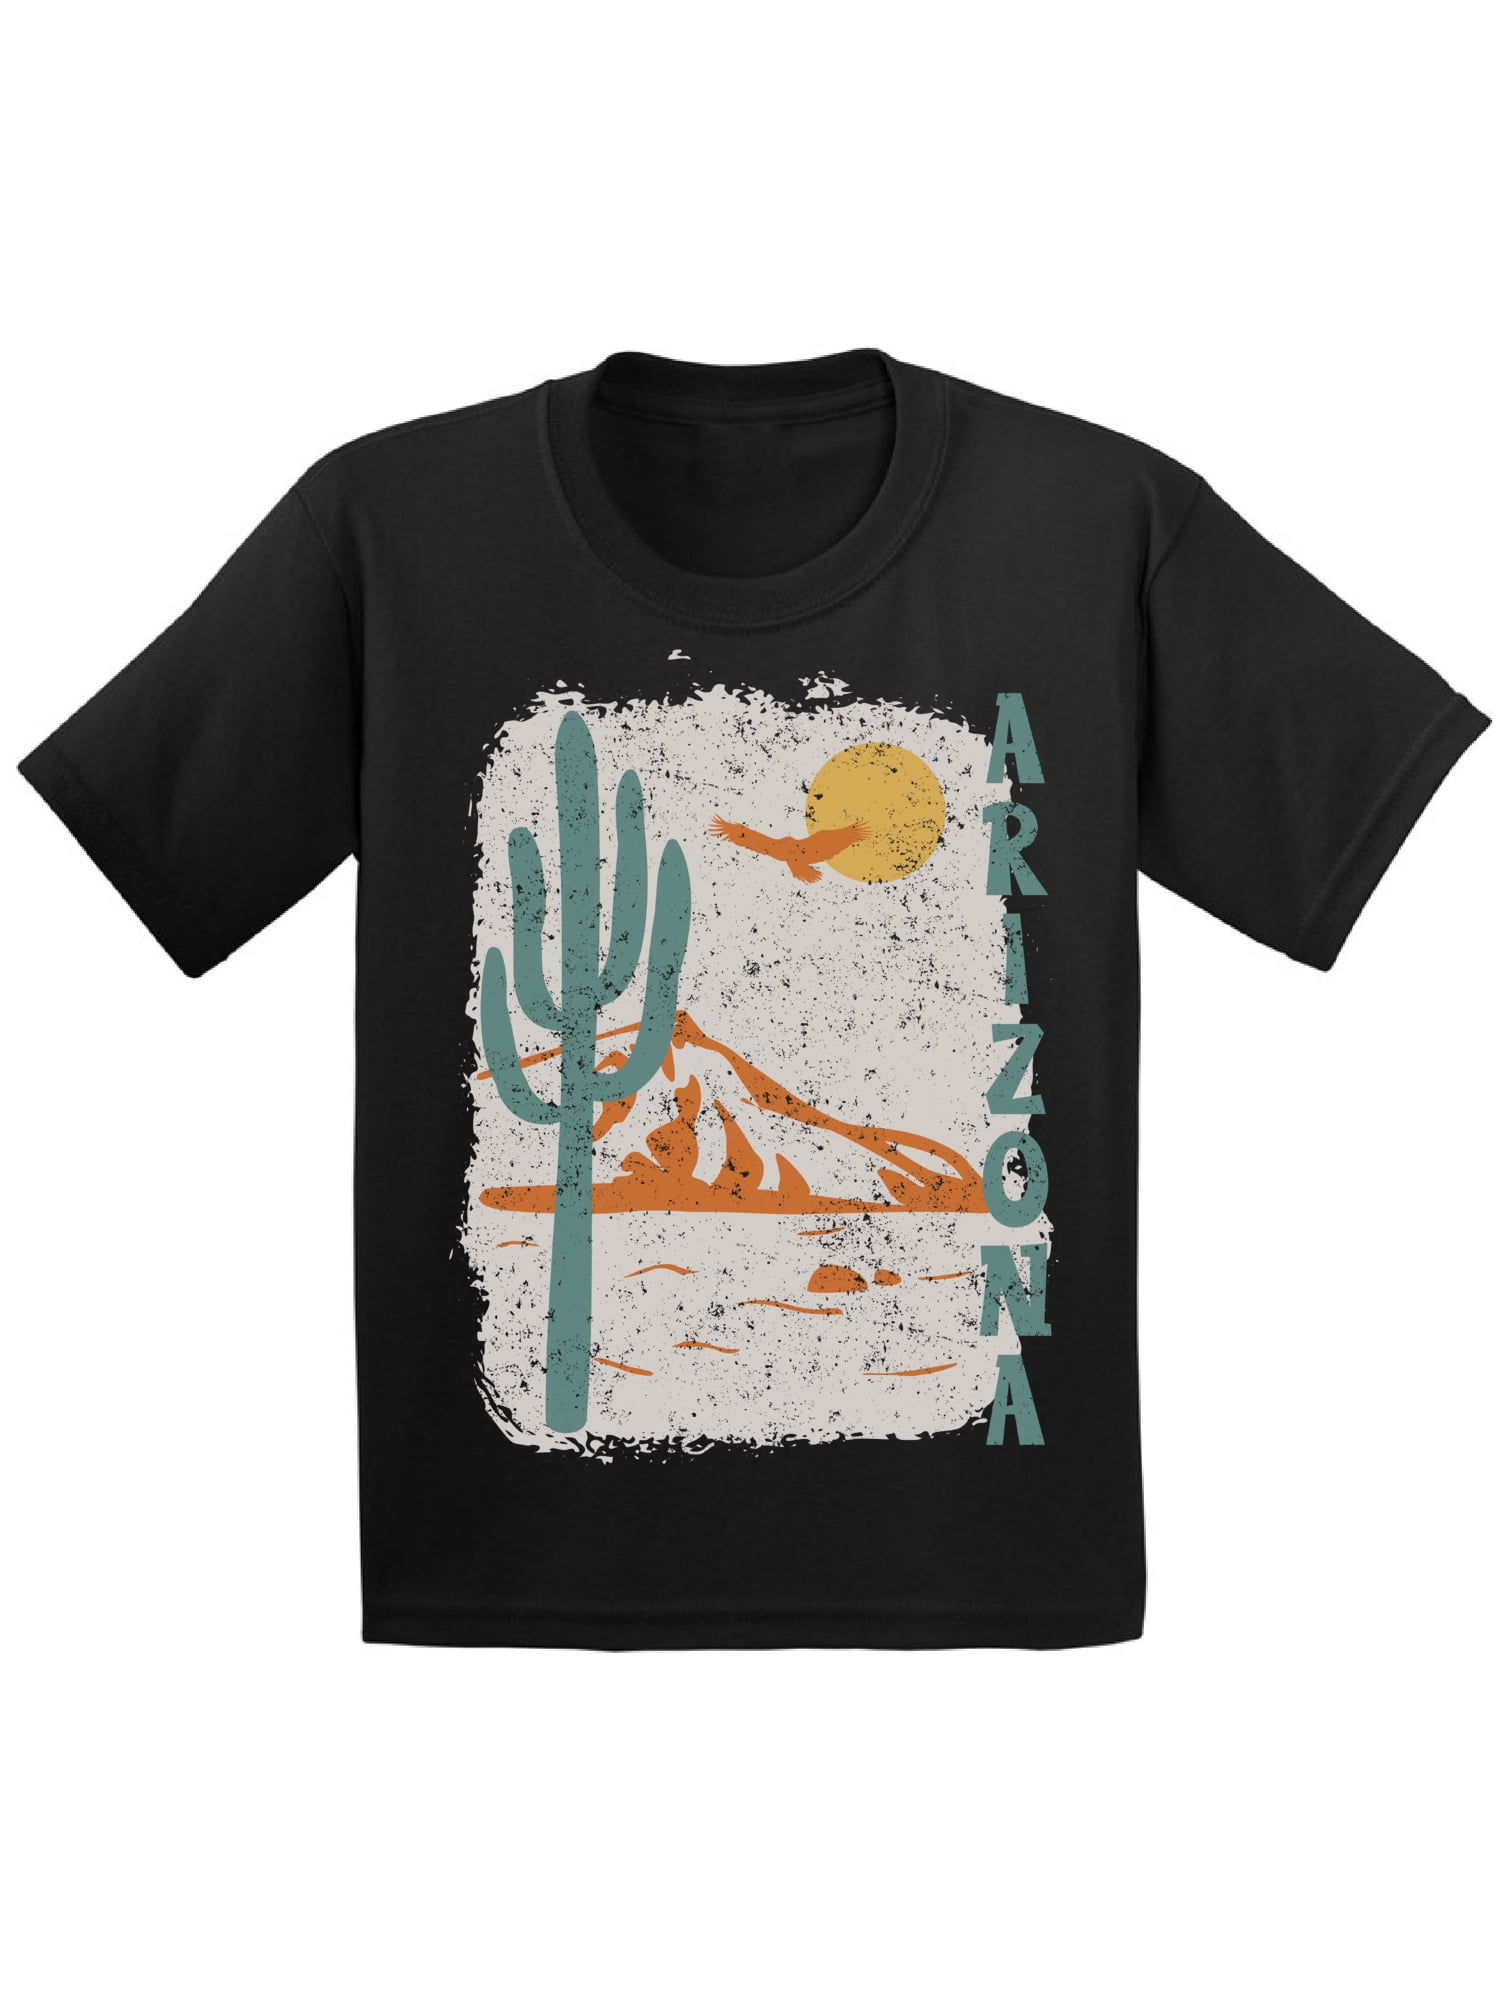 Arizona Shirt for Kids - Age 6 to 15 Years - AZ State USA - Youth Graphic  Novelty Souvenir